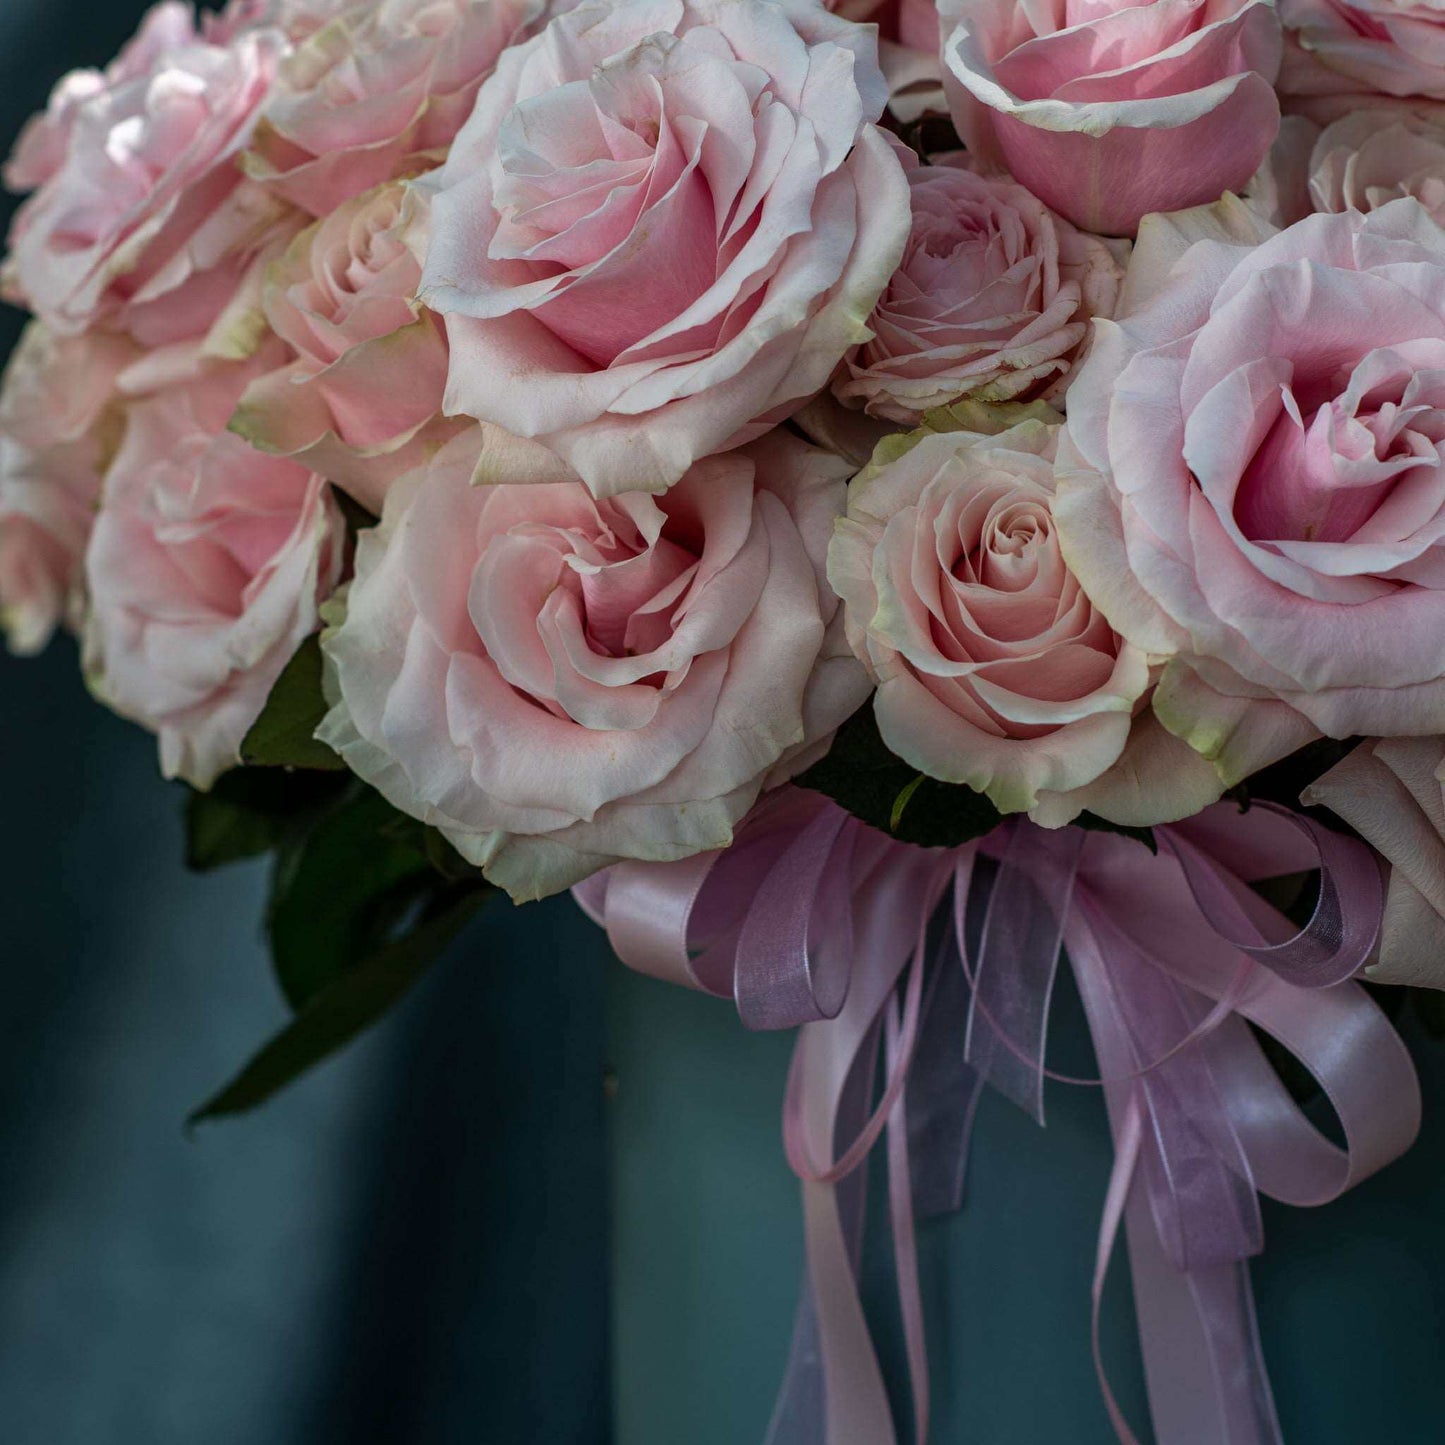 Blush Pink Roses Presented in a Hatbox - Pulbrook and Gould Flowers London